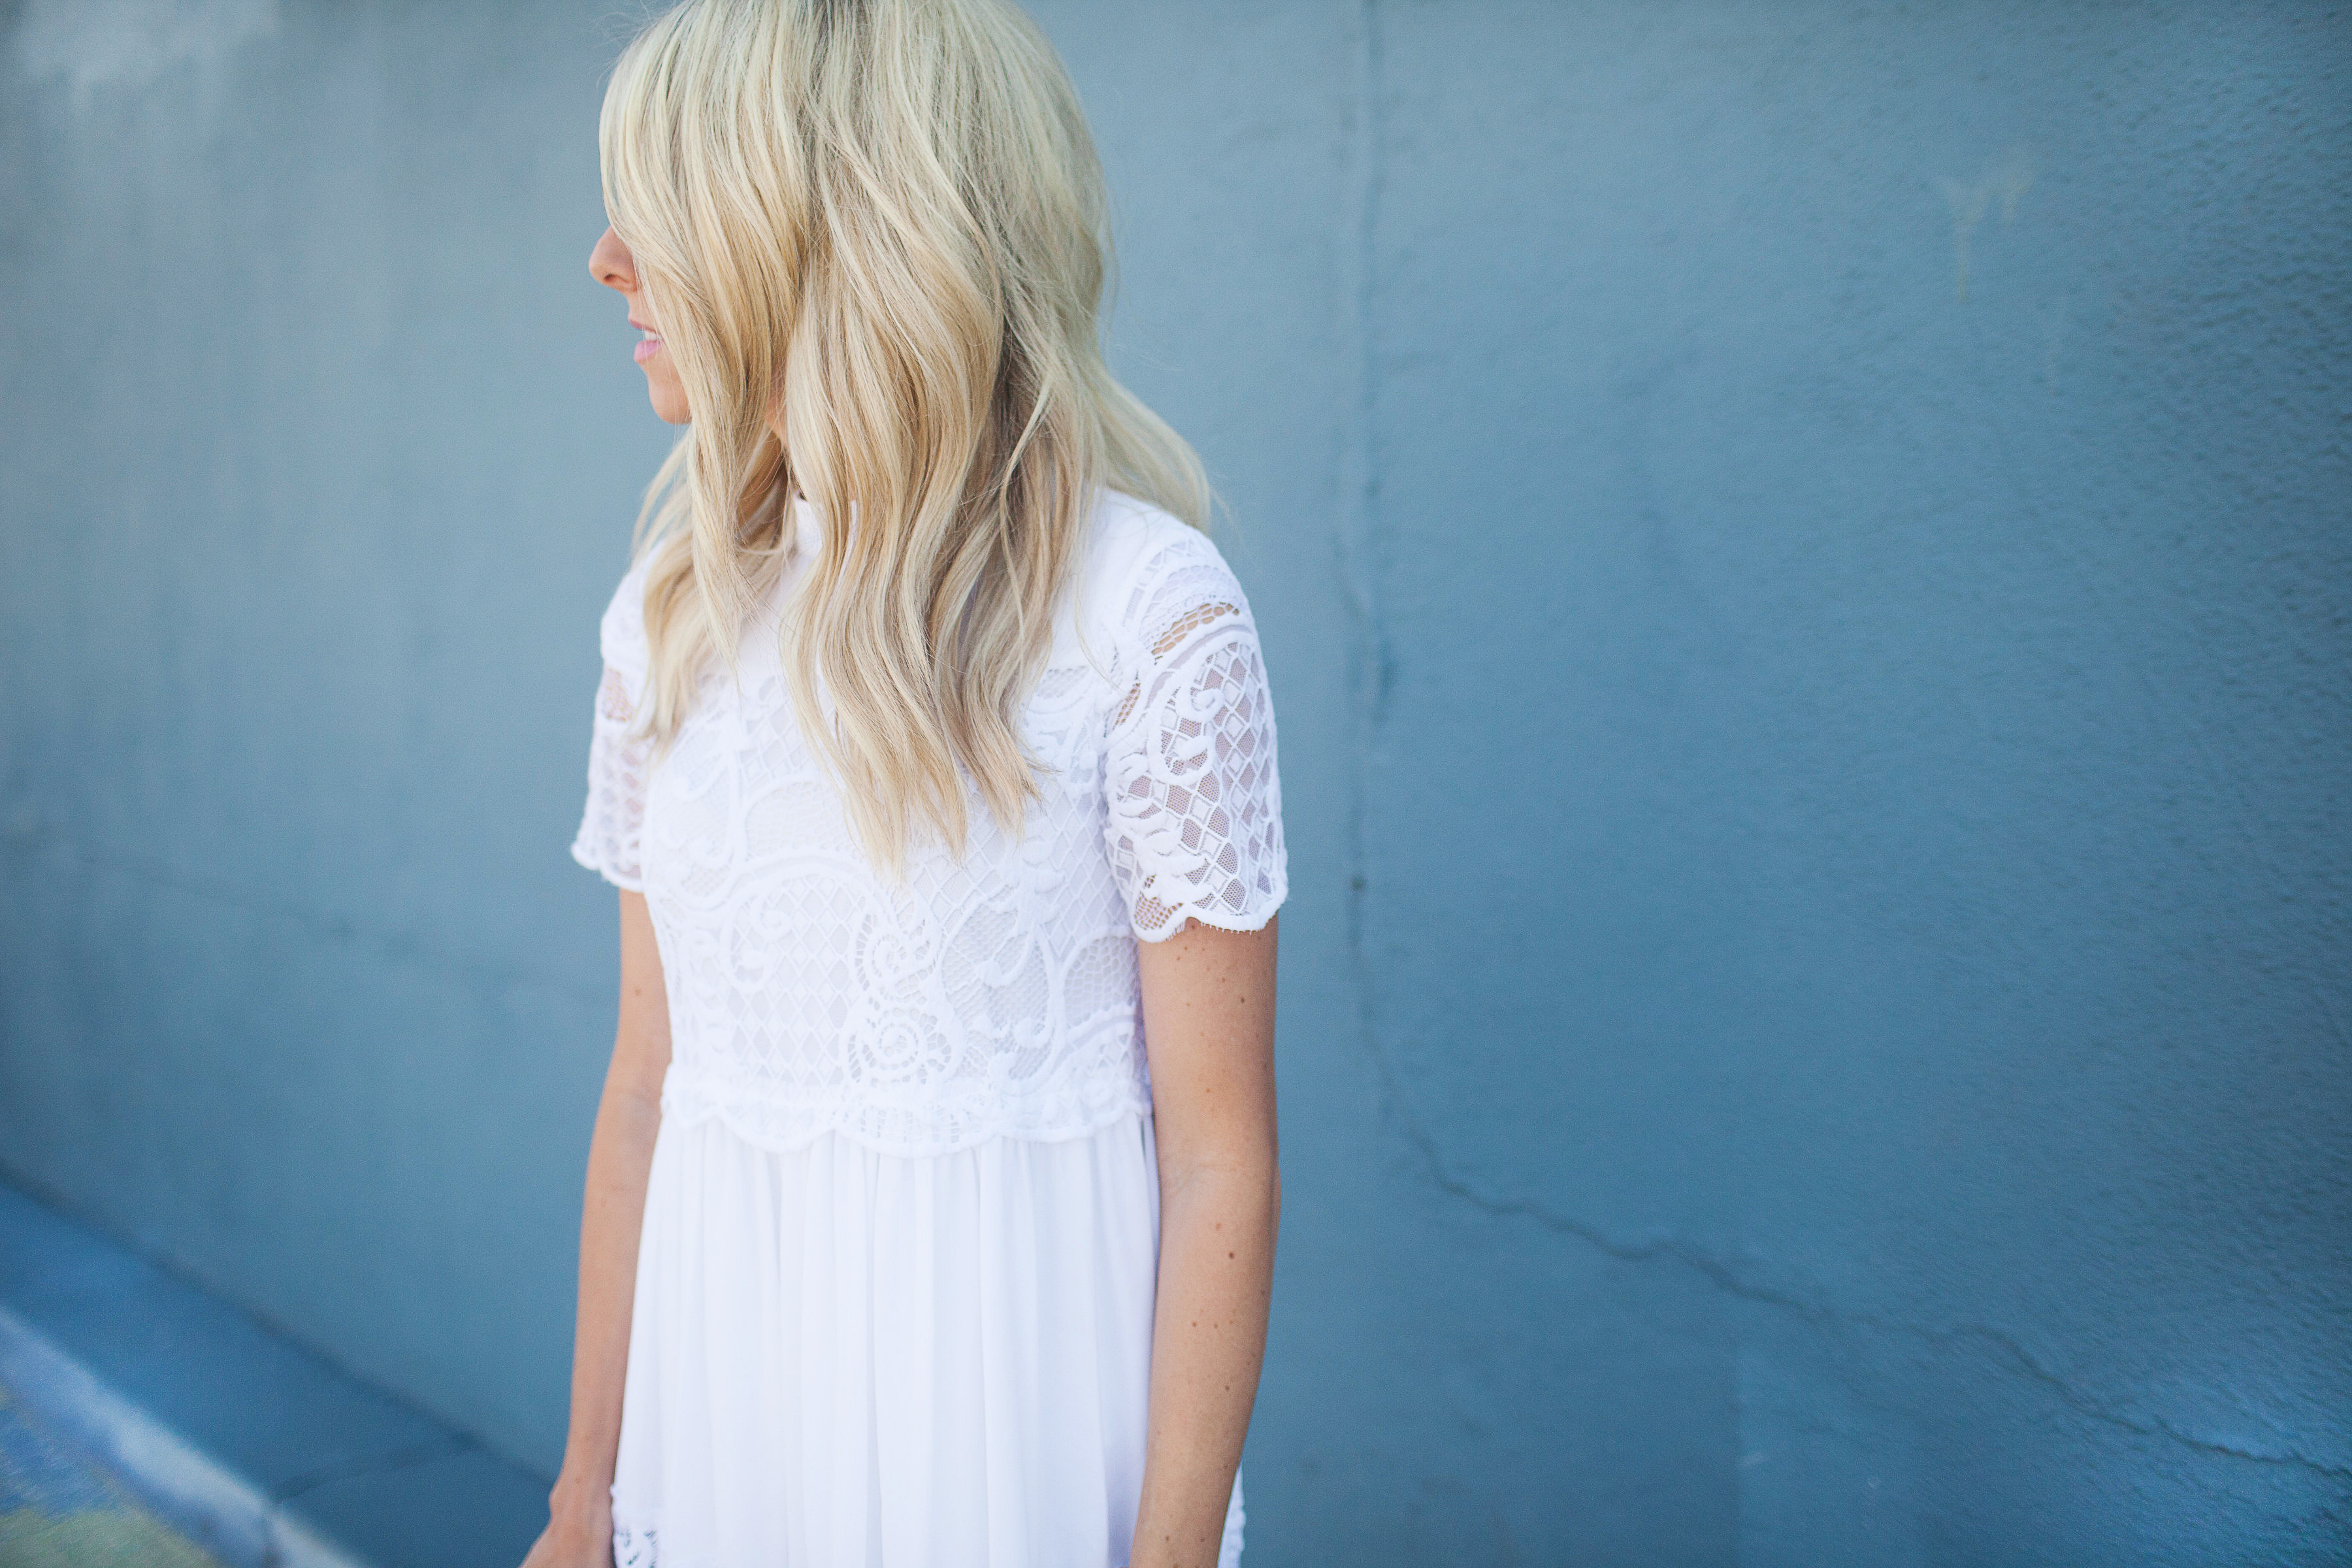 kendal-and-kylie-white-lace-dress